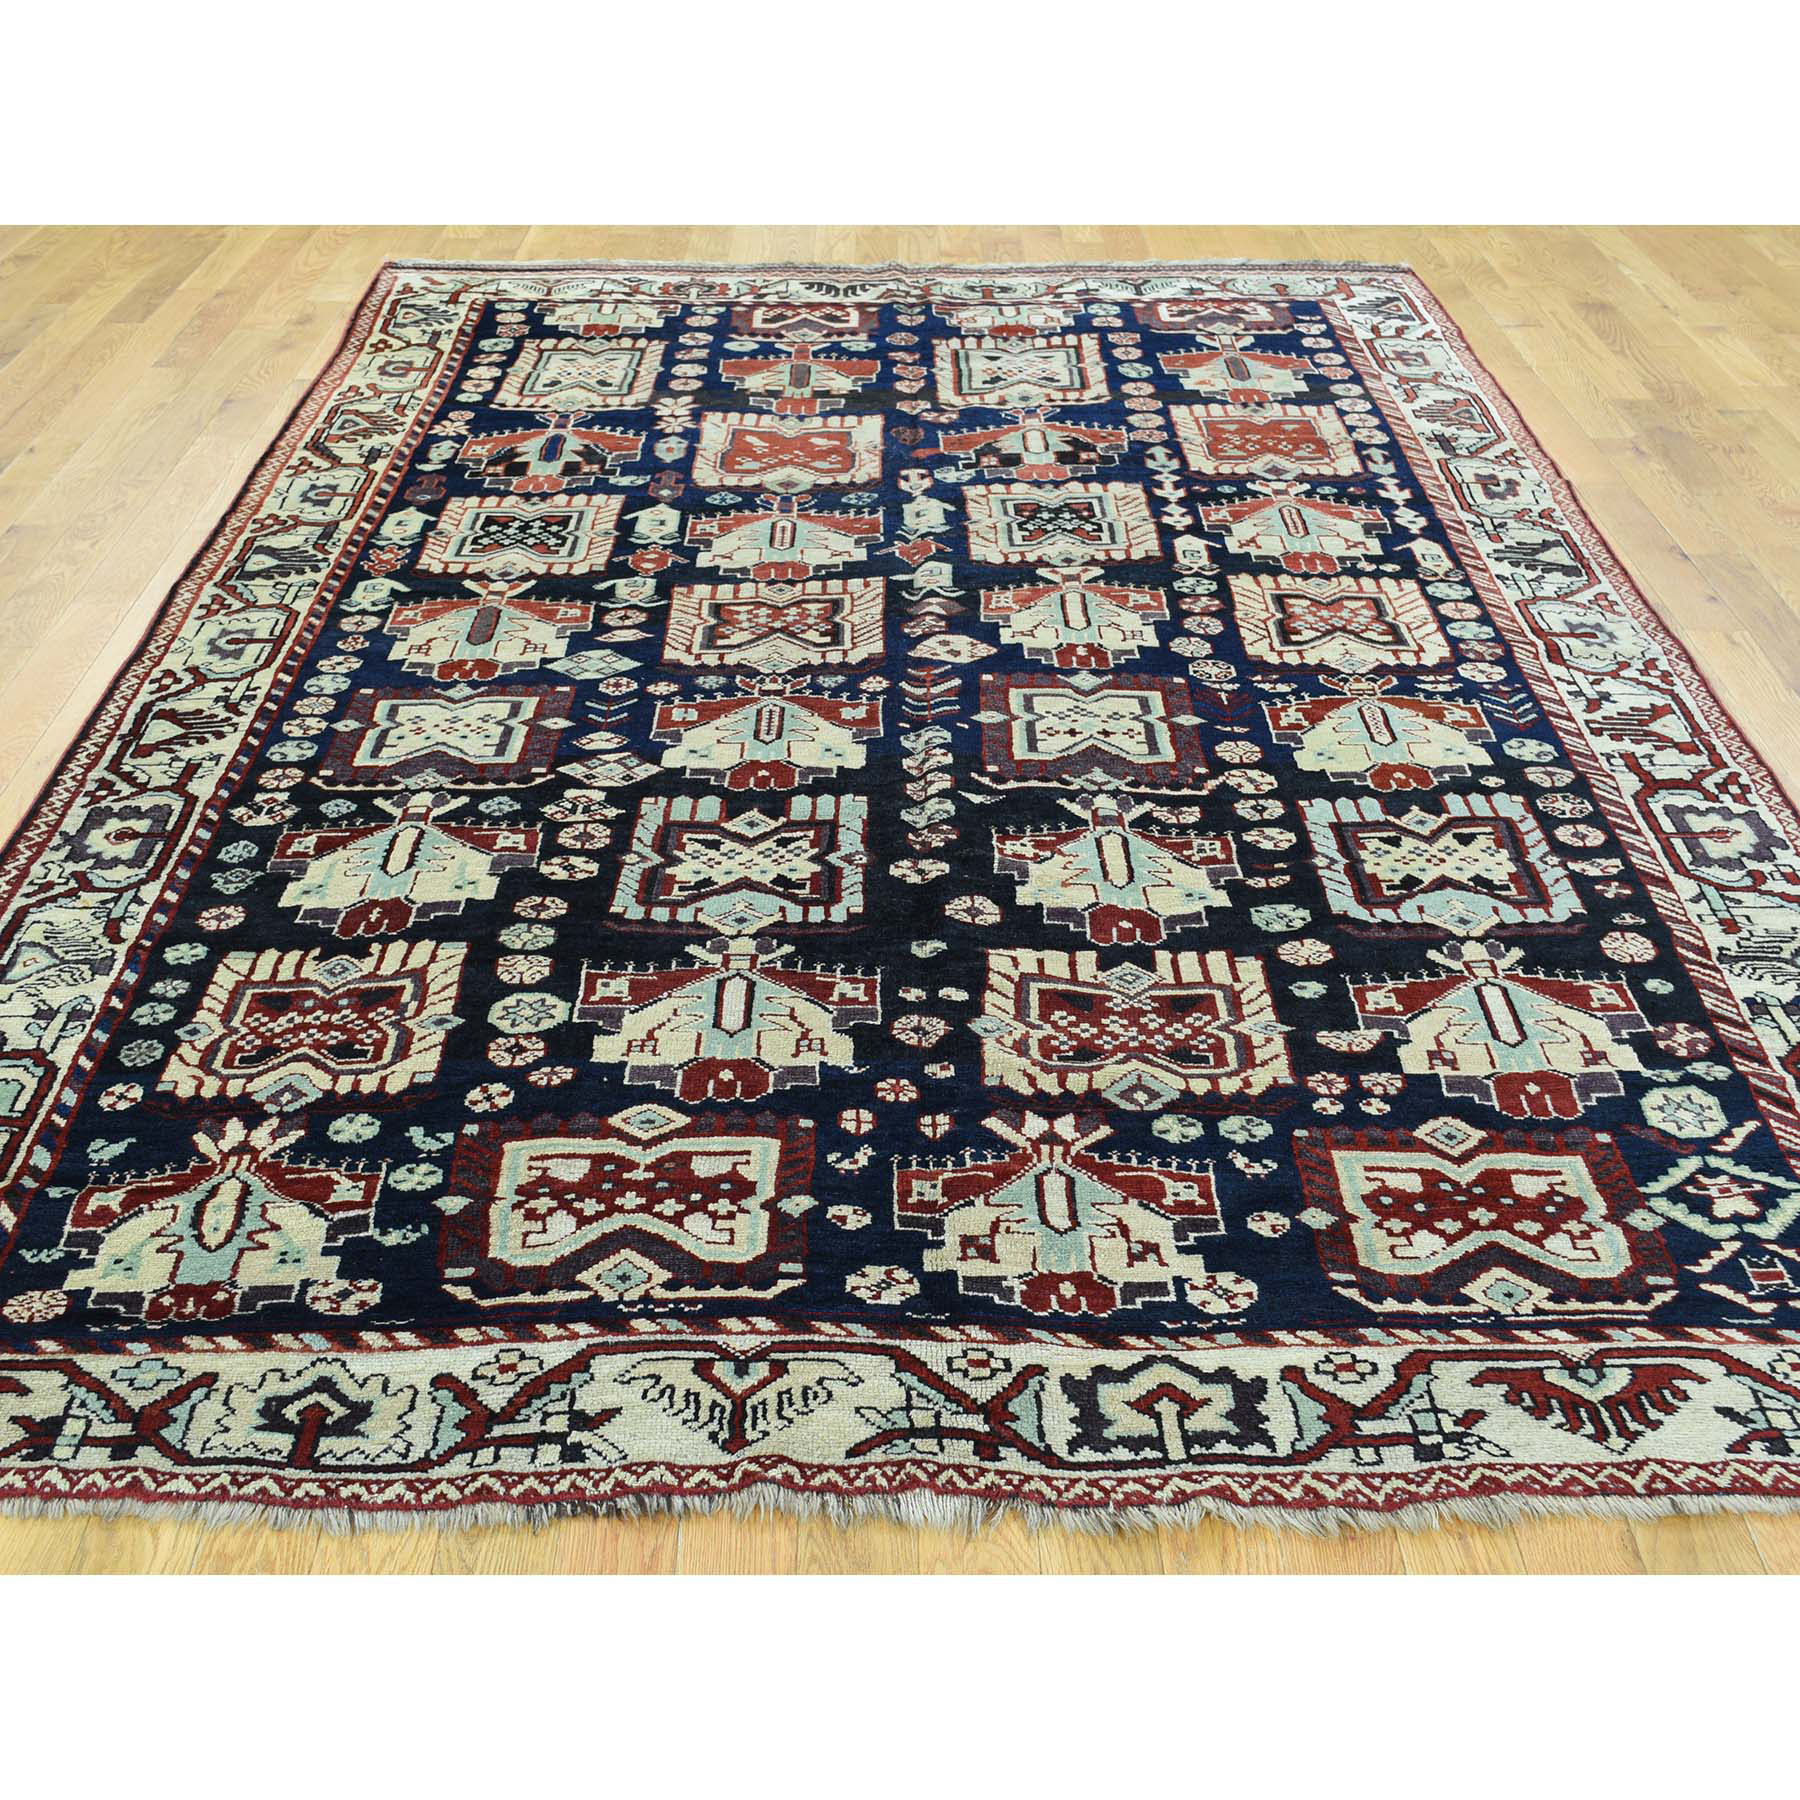 6-6 x10- Hand-Knotted Antique Persian Kurdish Full Pile Exc Cond Rug 